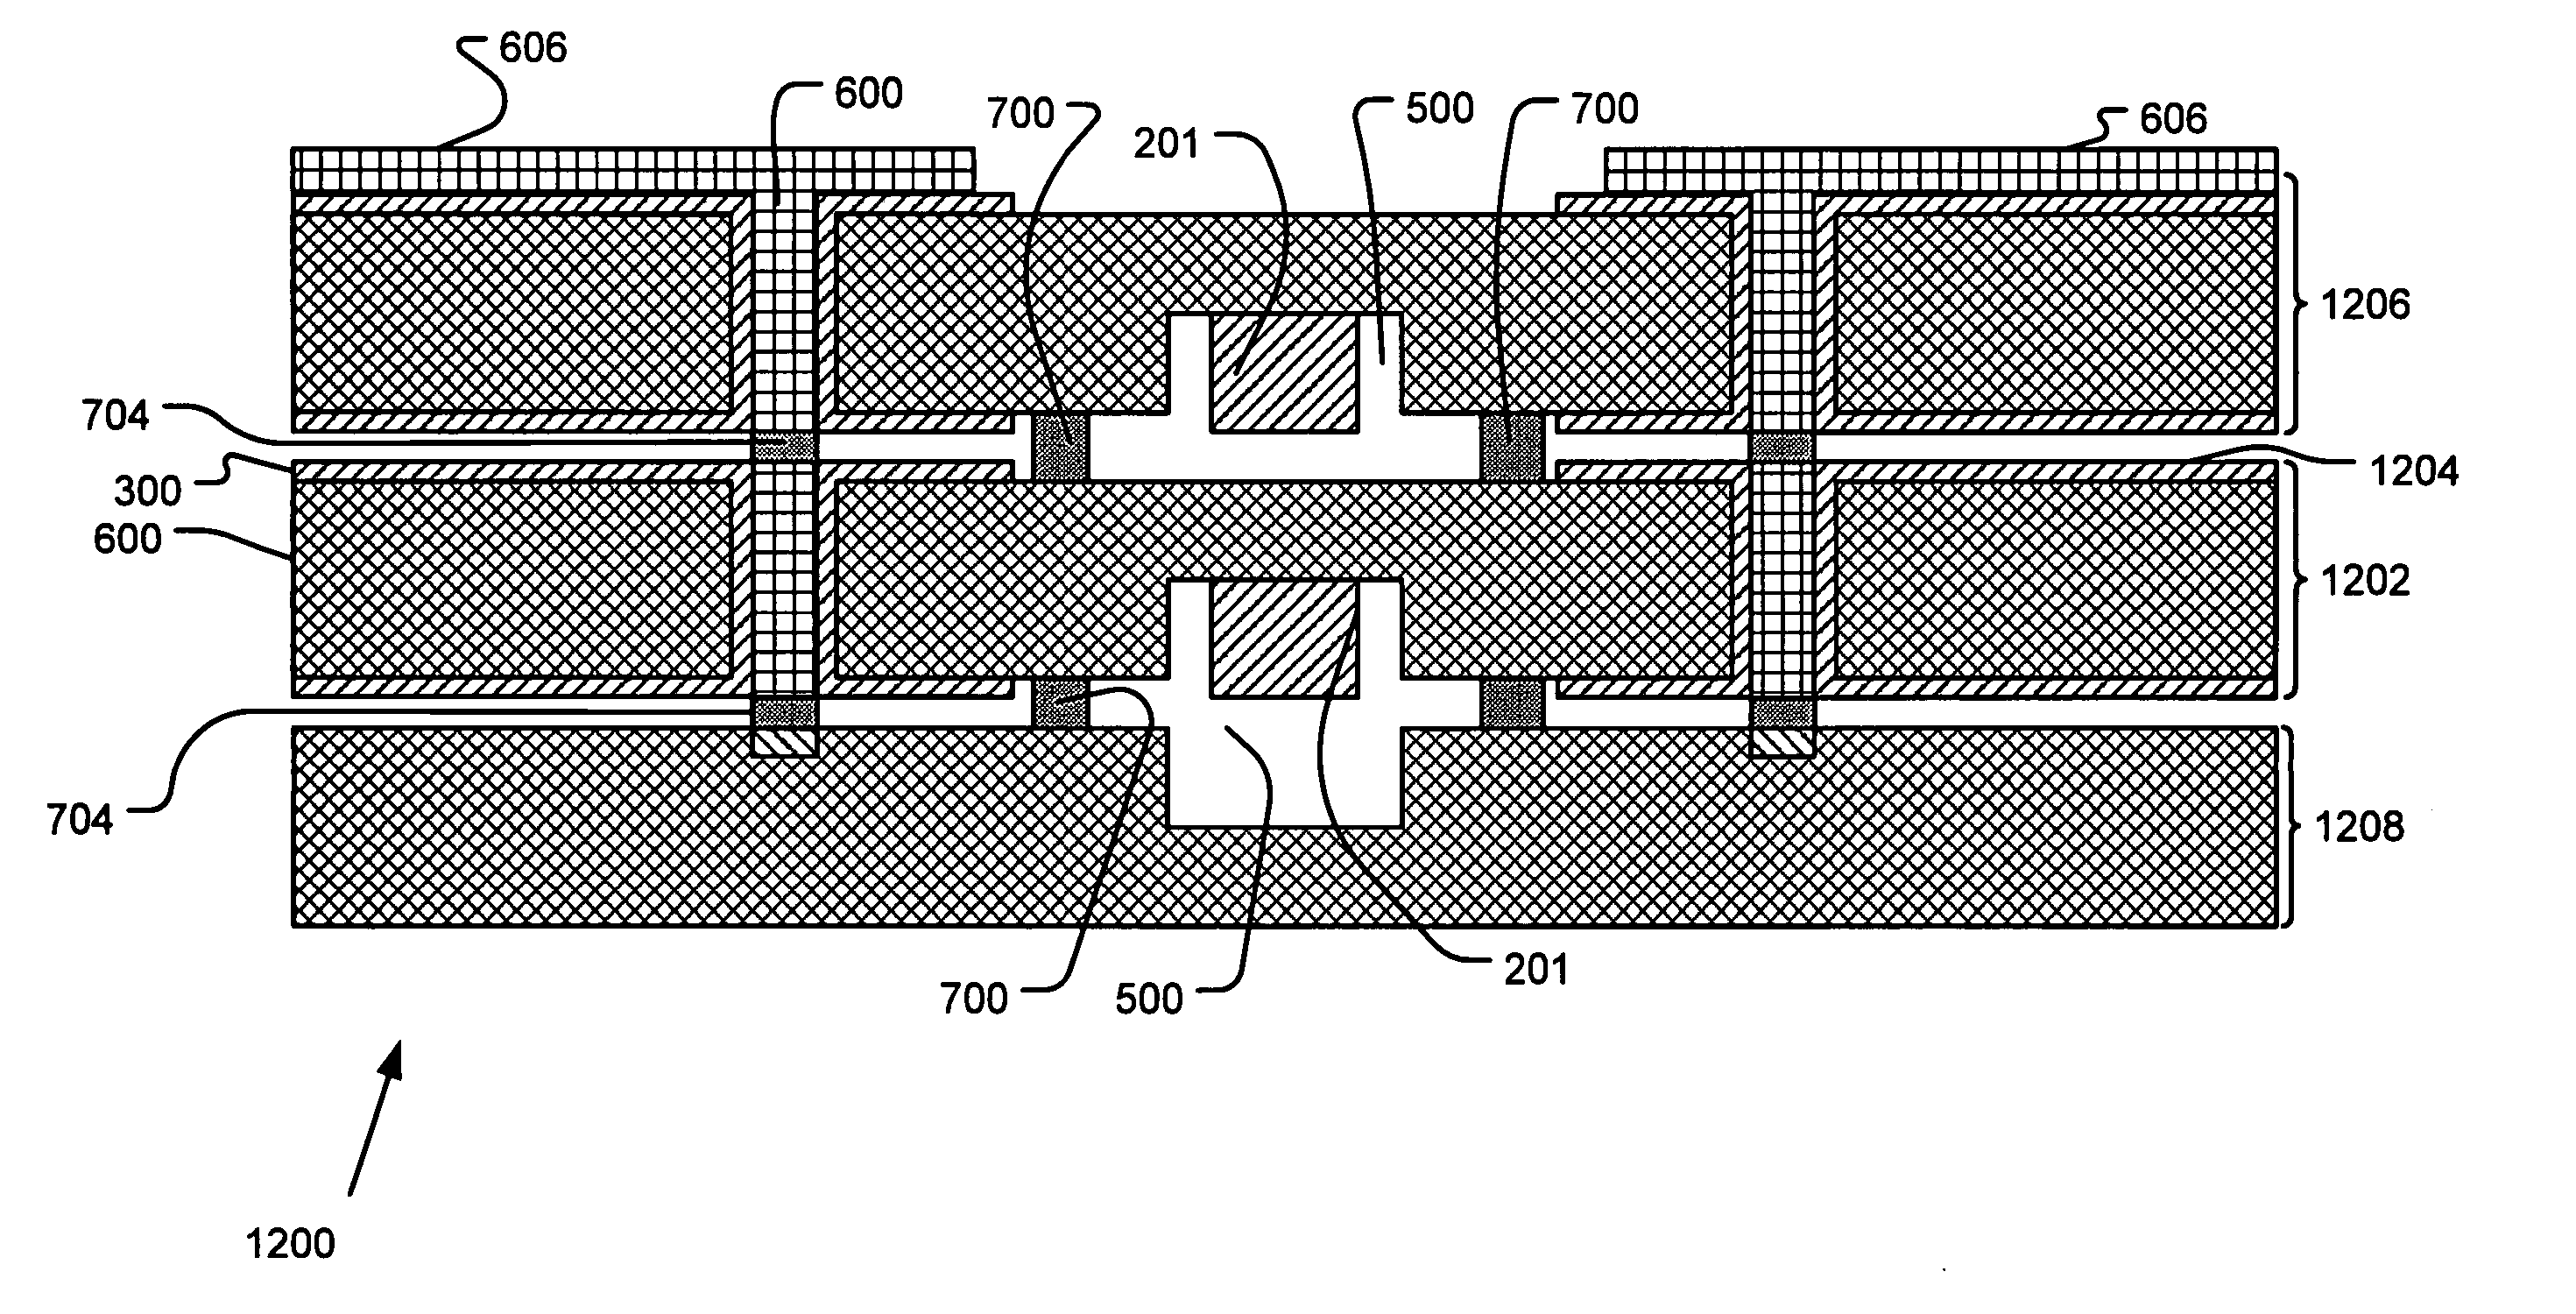 Wafer-level package for integrated circuits